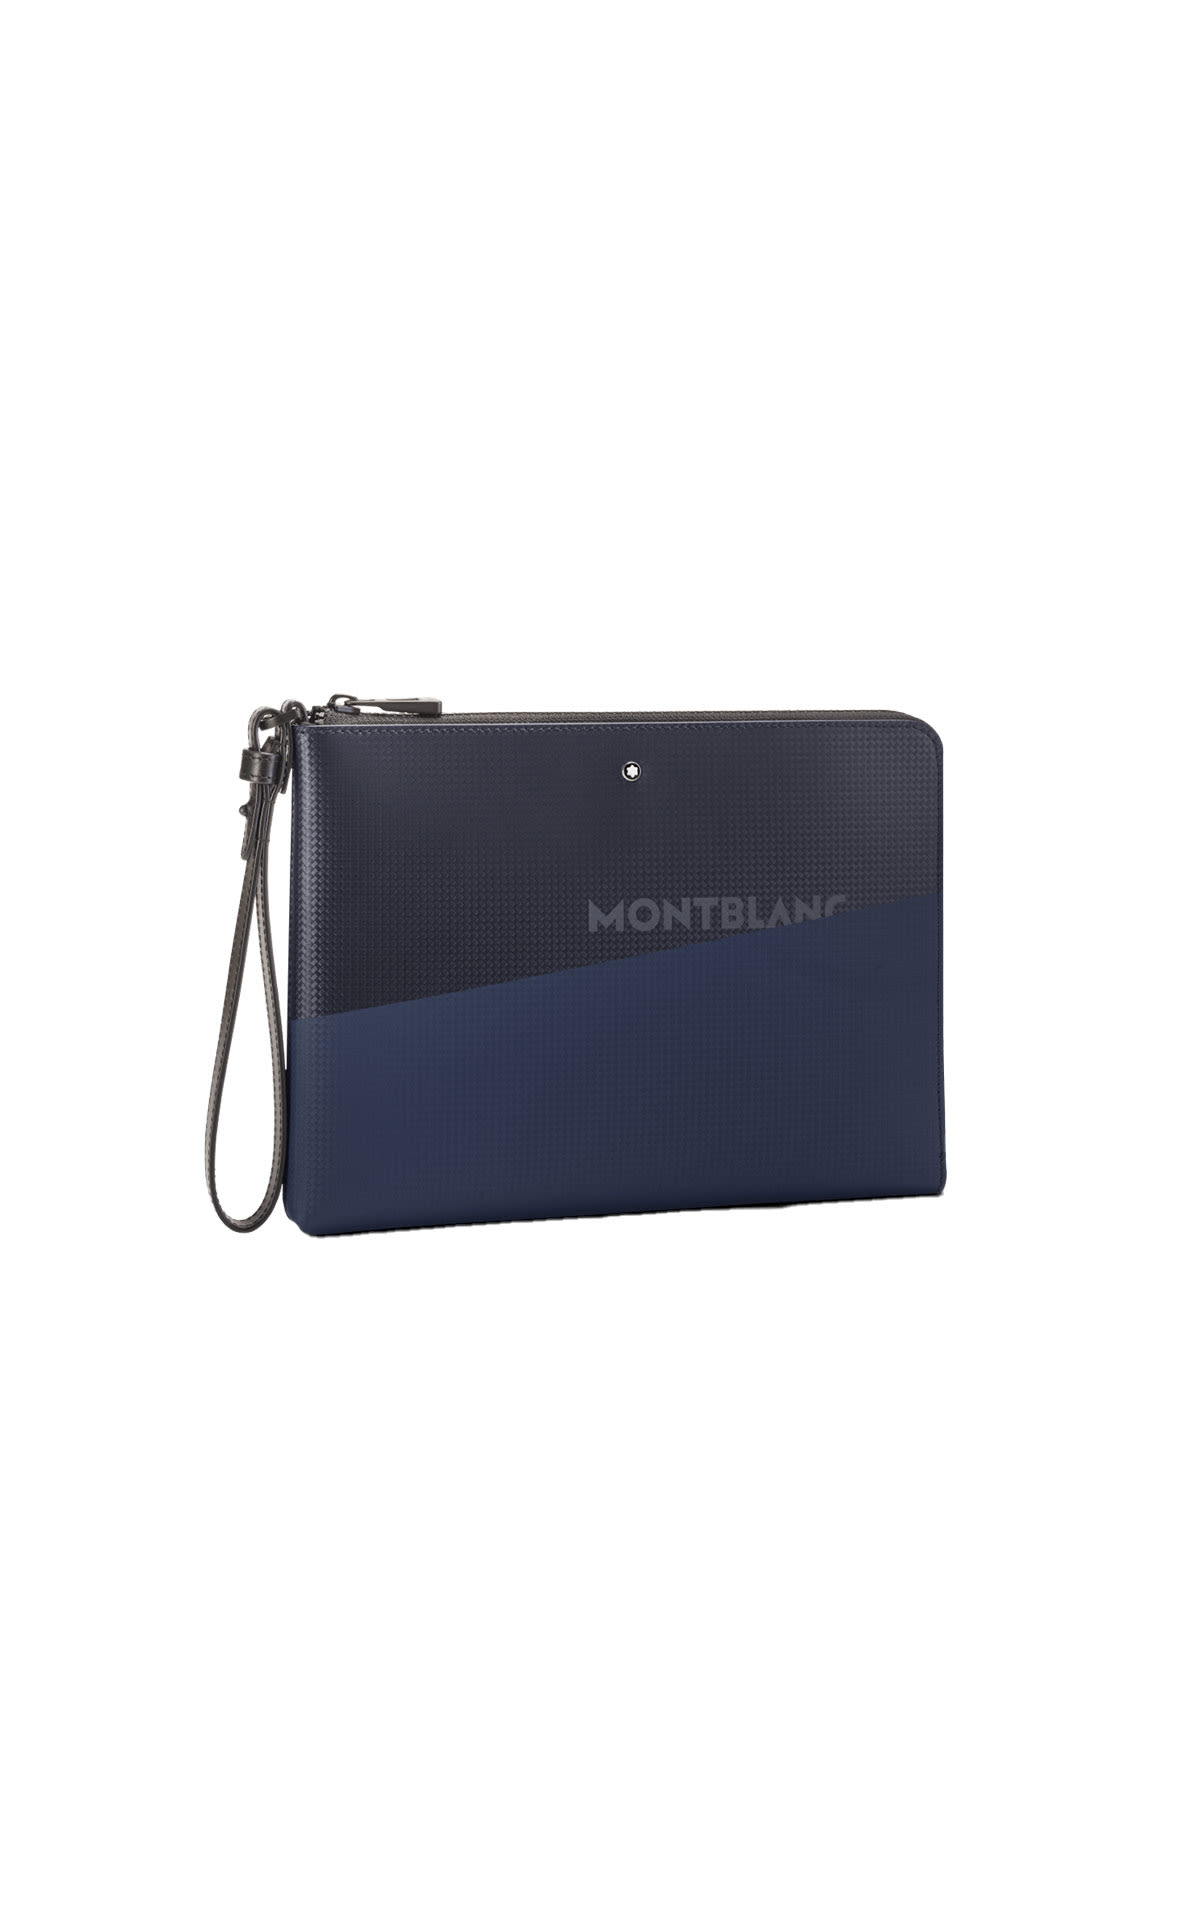 Montblanc Pouch Extreme 2.0 